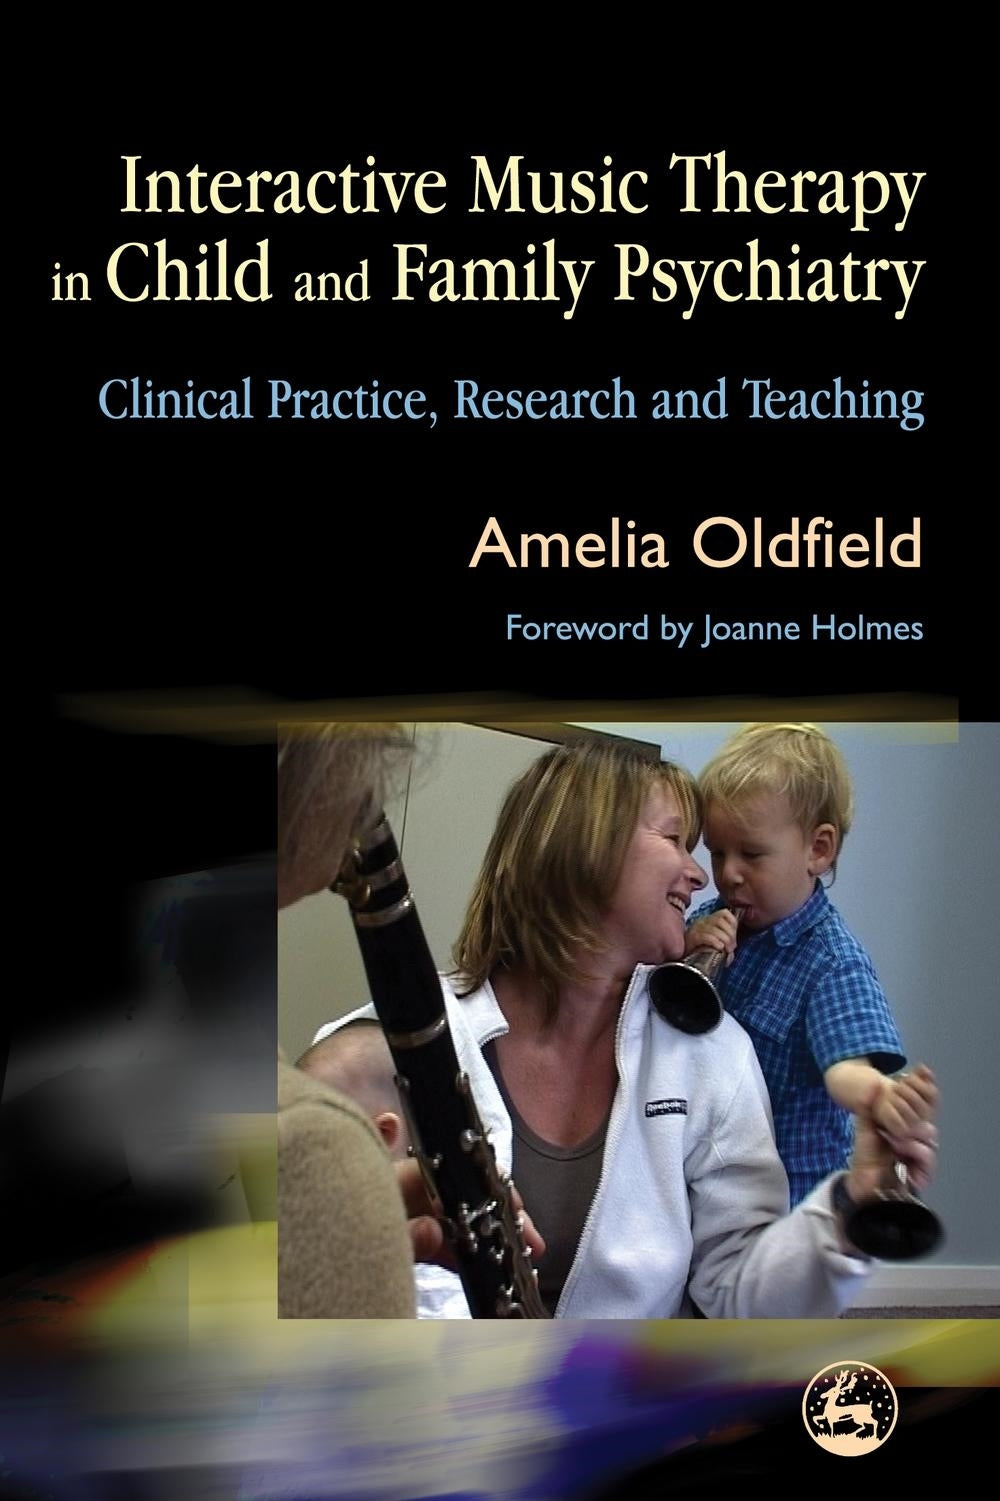 Interactive Music Therapy in Child and Family Psychiatry by Amelia Oldfield, Jo Holmes